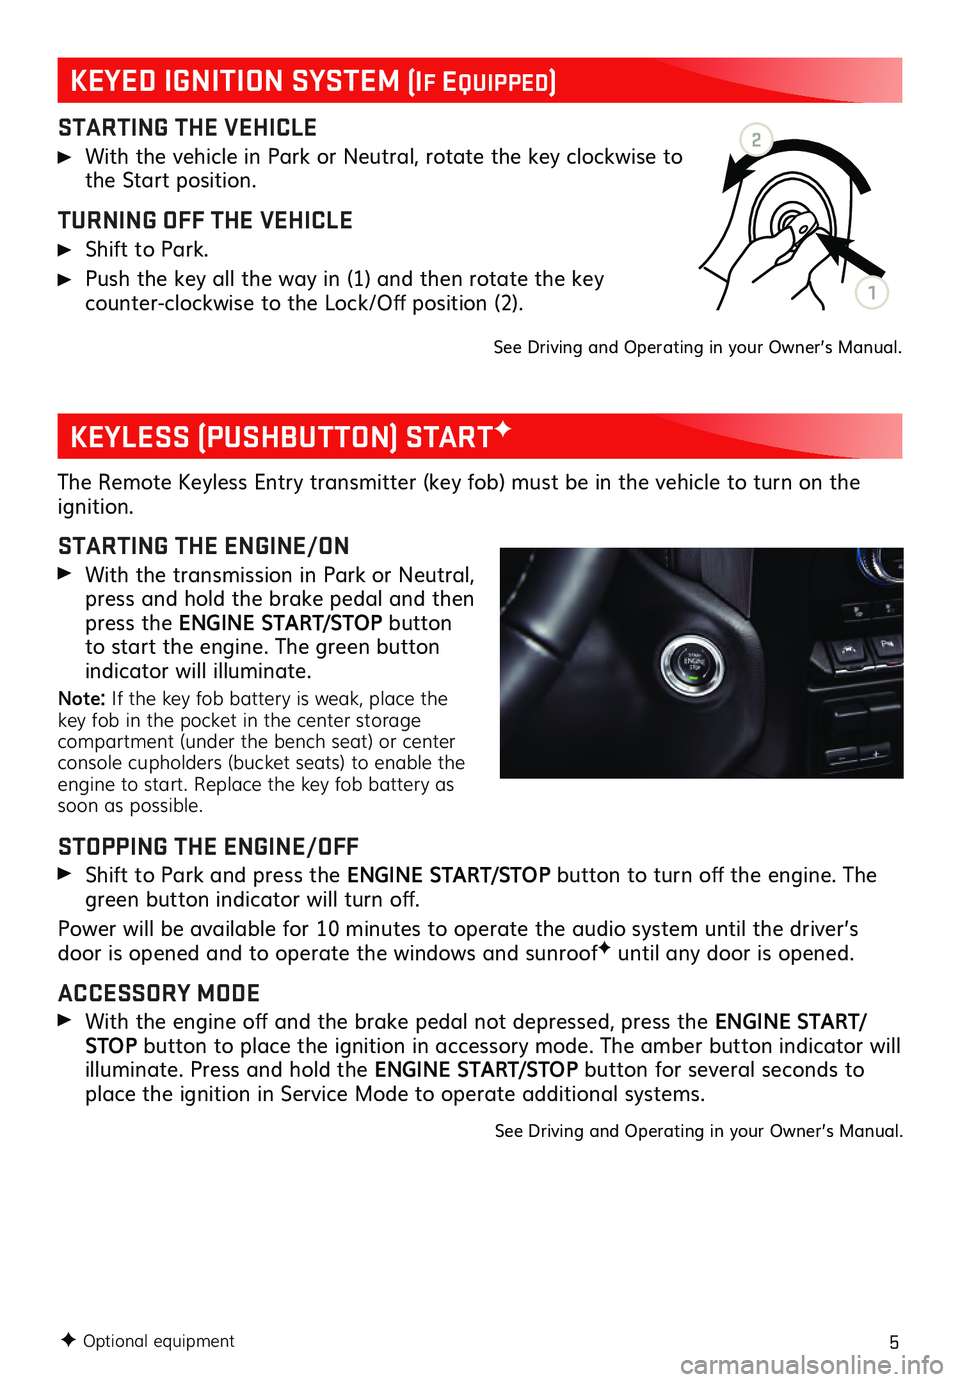 GMC SIERRA 2021  Get To Know Guide 5
STARTING THE VEHICLE
 With the vehicle in Park or Neutral, rotate the key clockwise to the Start position. 
TURNING OFF THE VEHICLE
 Shift to Park. 
 Push the key all the way in (1) and then rotate 